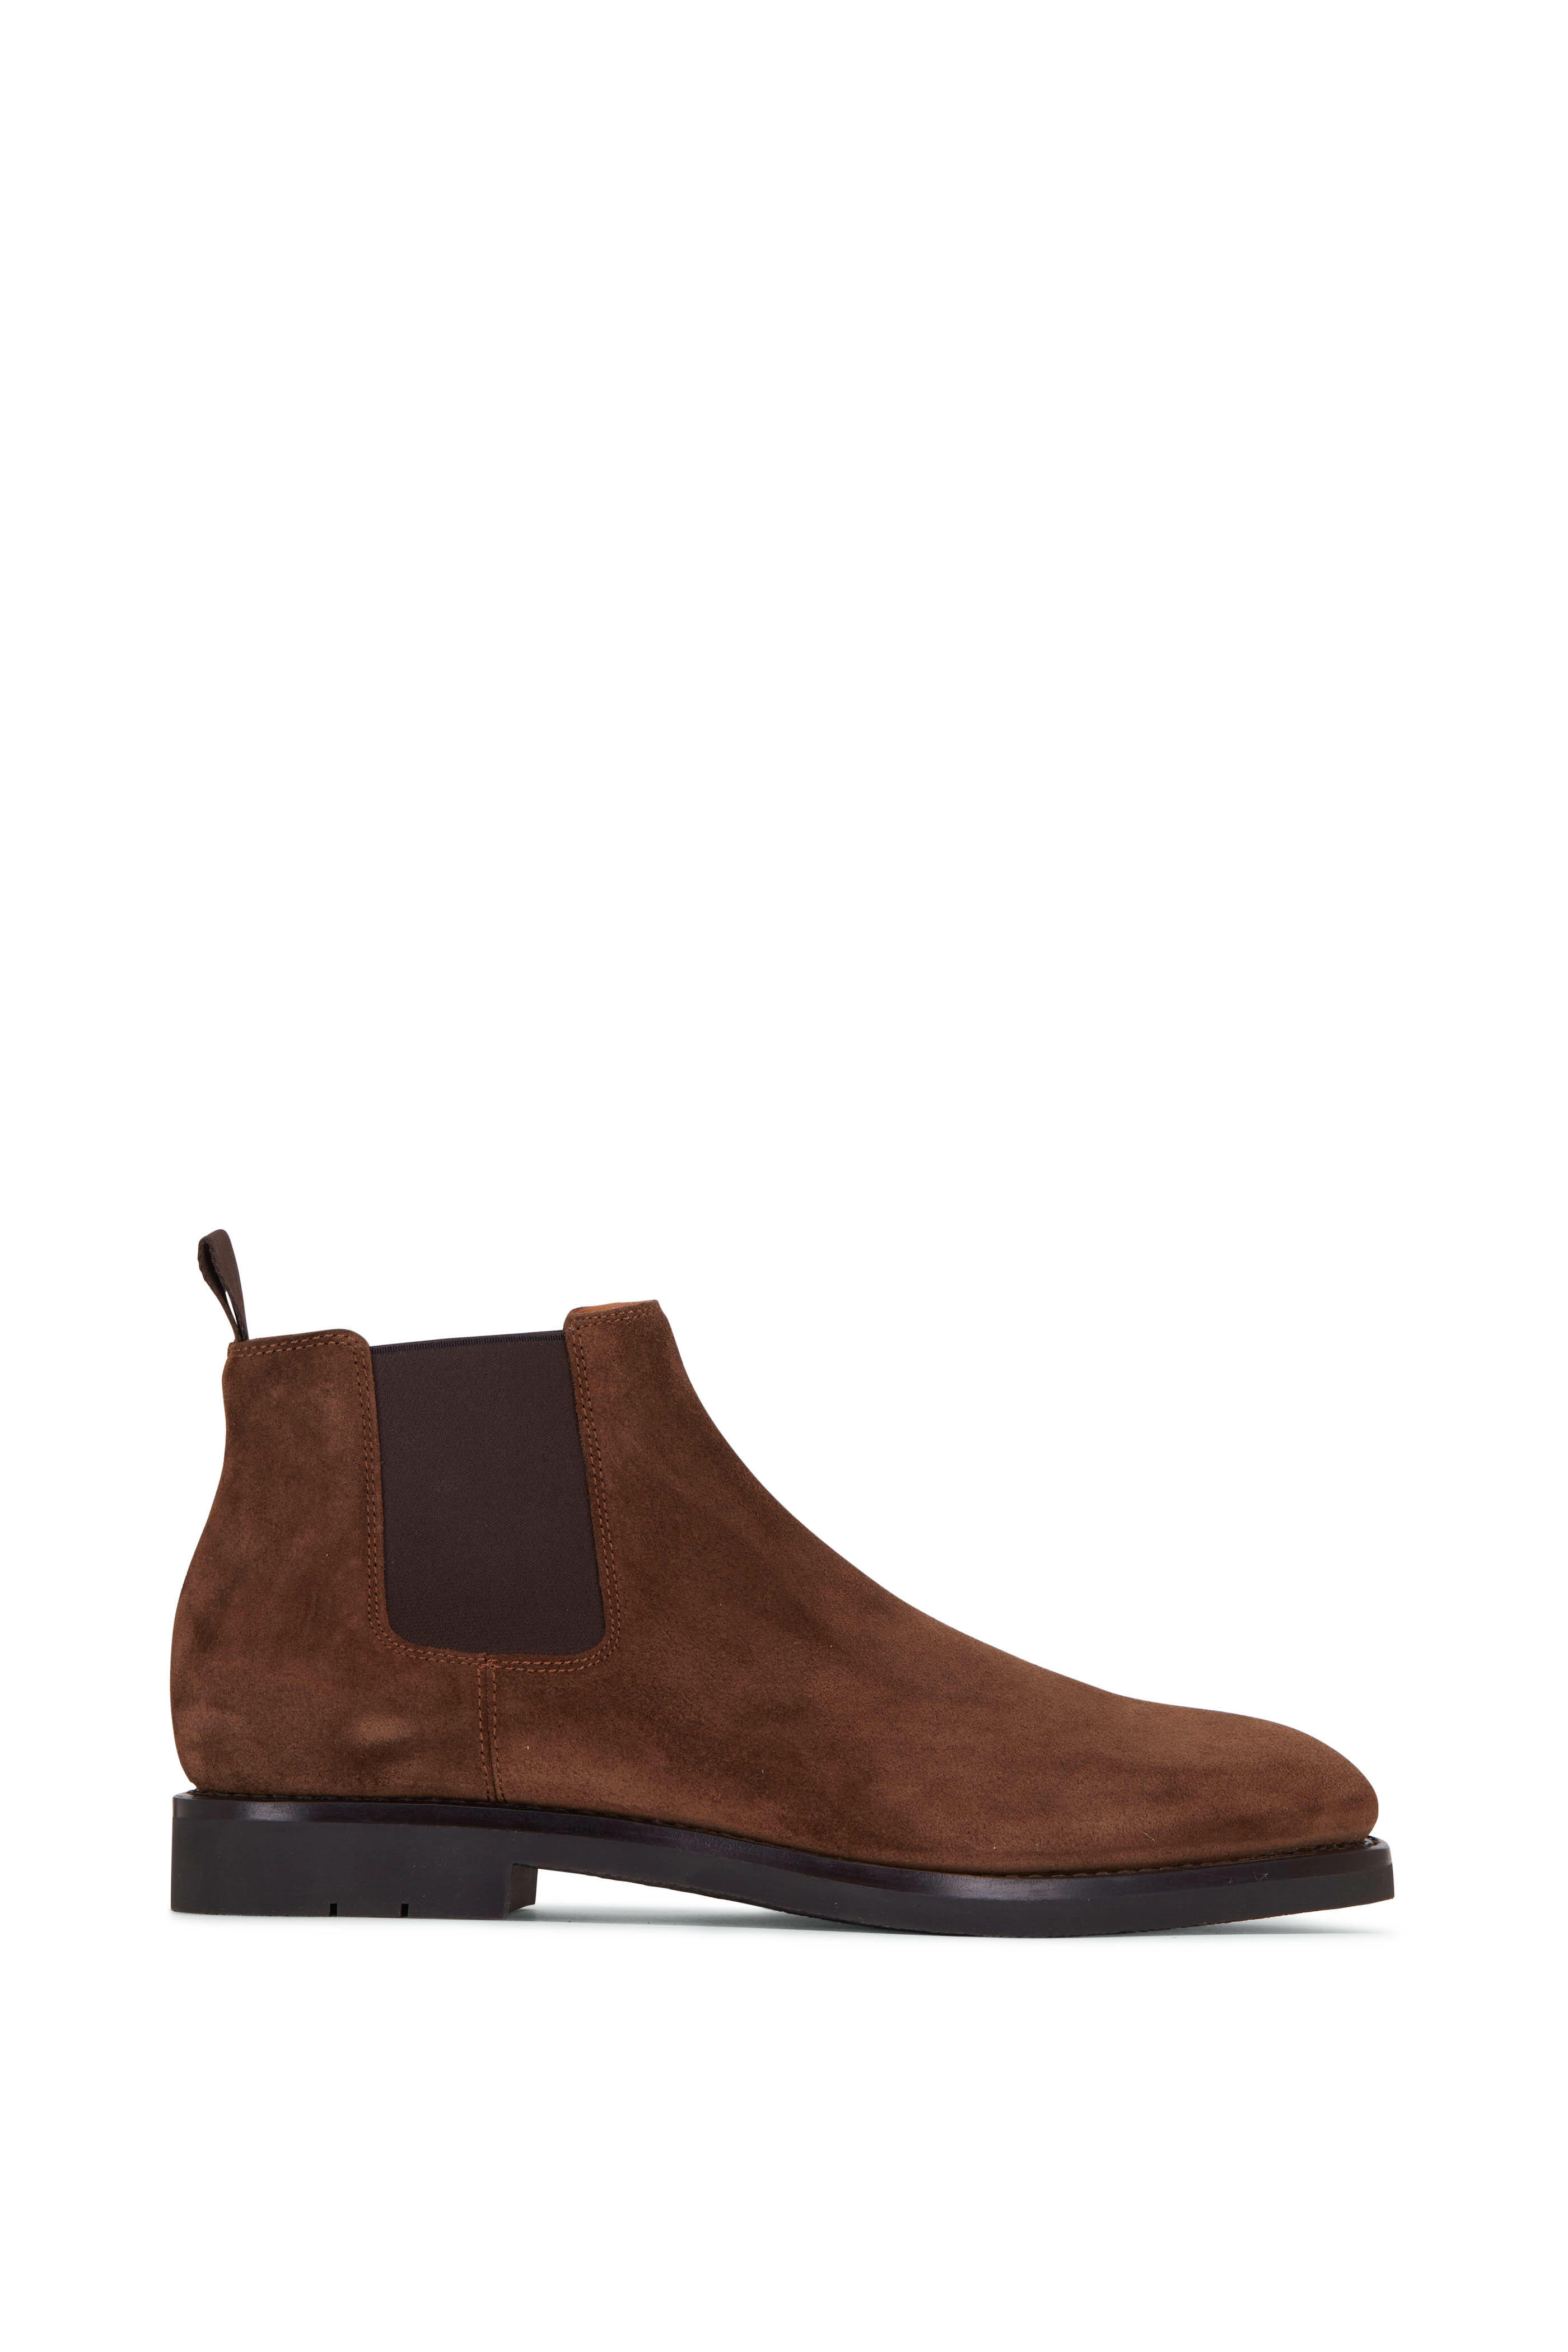 Heschung - Fusain Hydrovelors Mocco Boot | Mitchell Stores